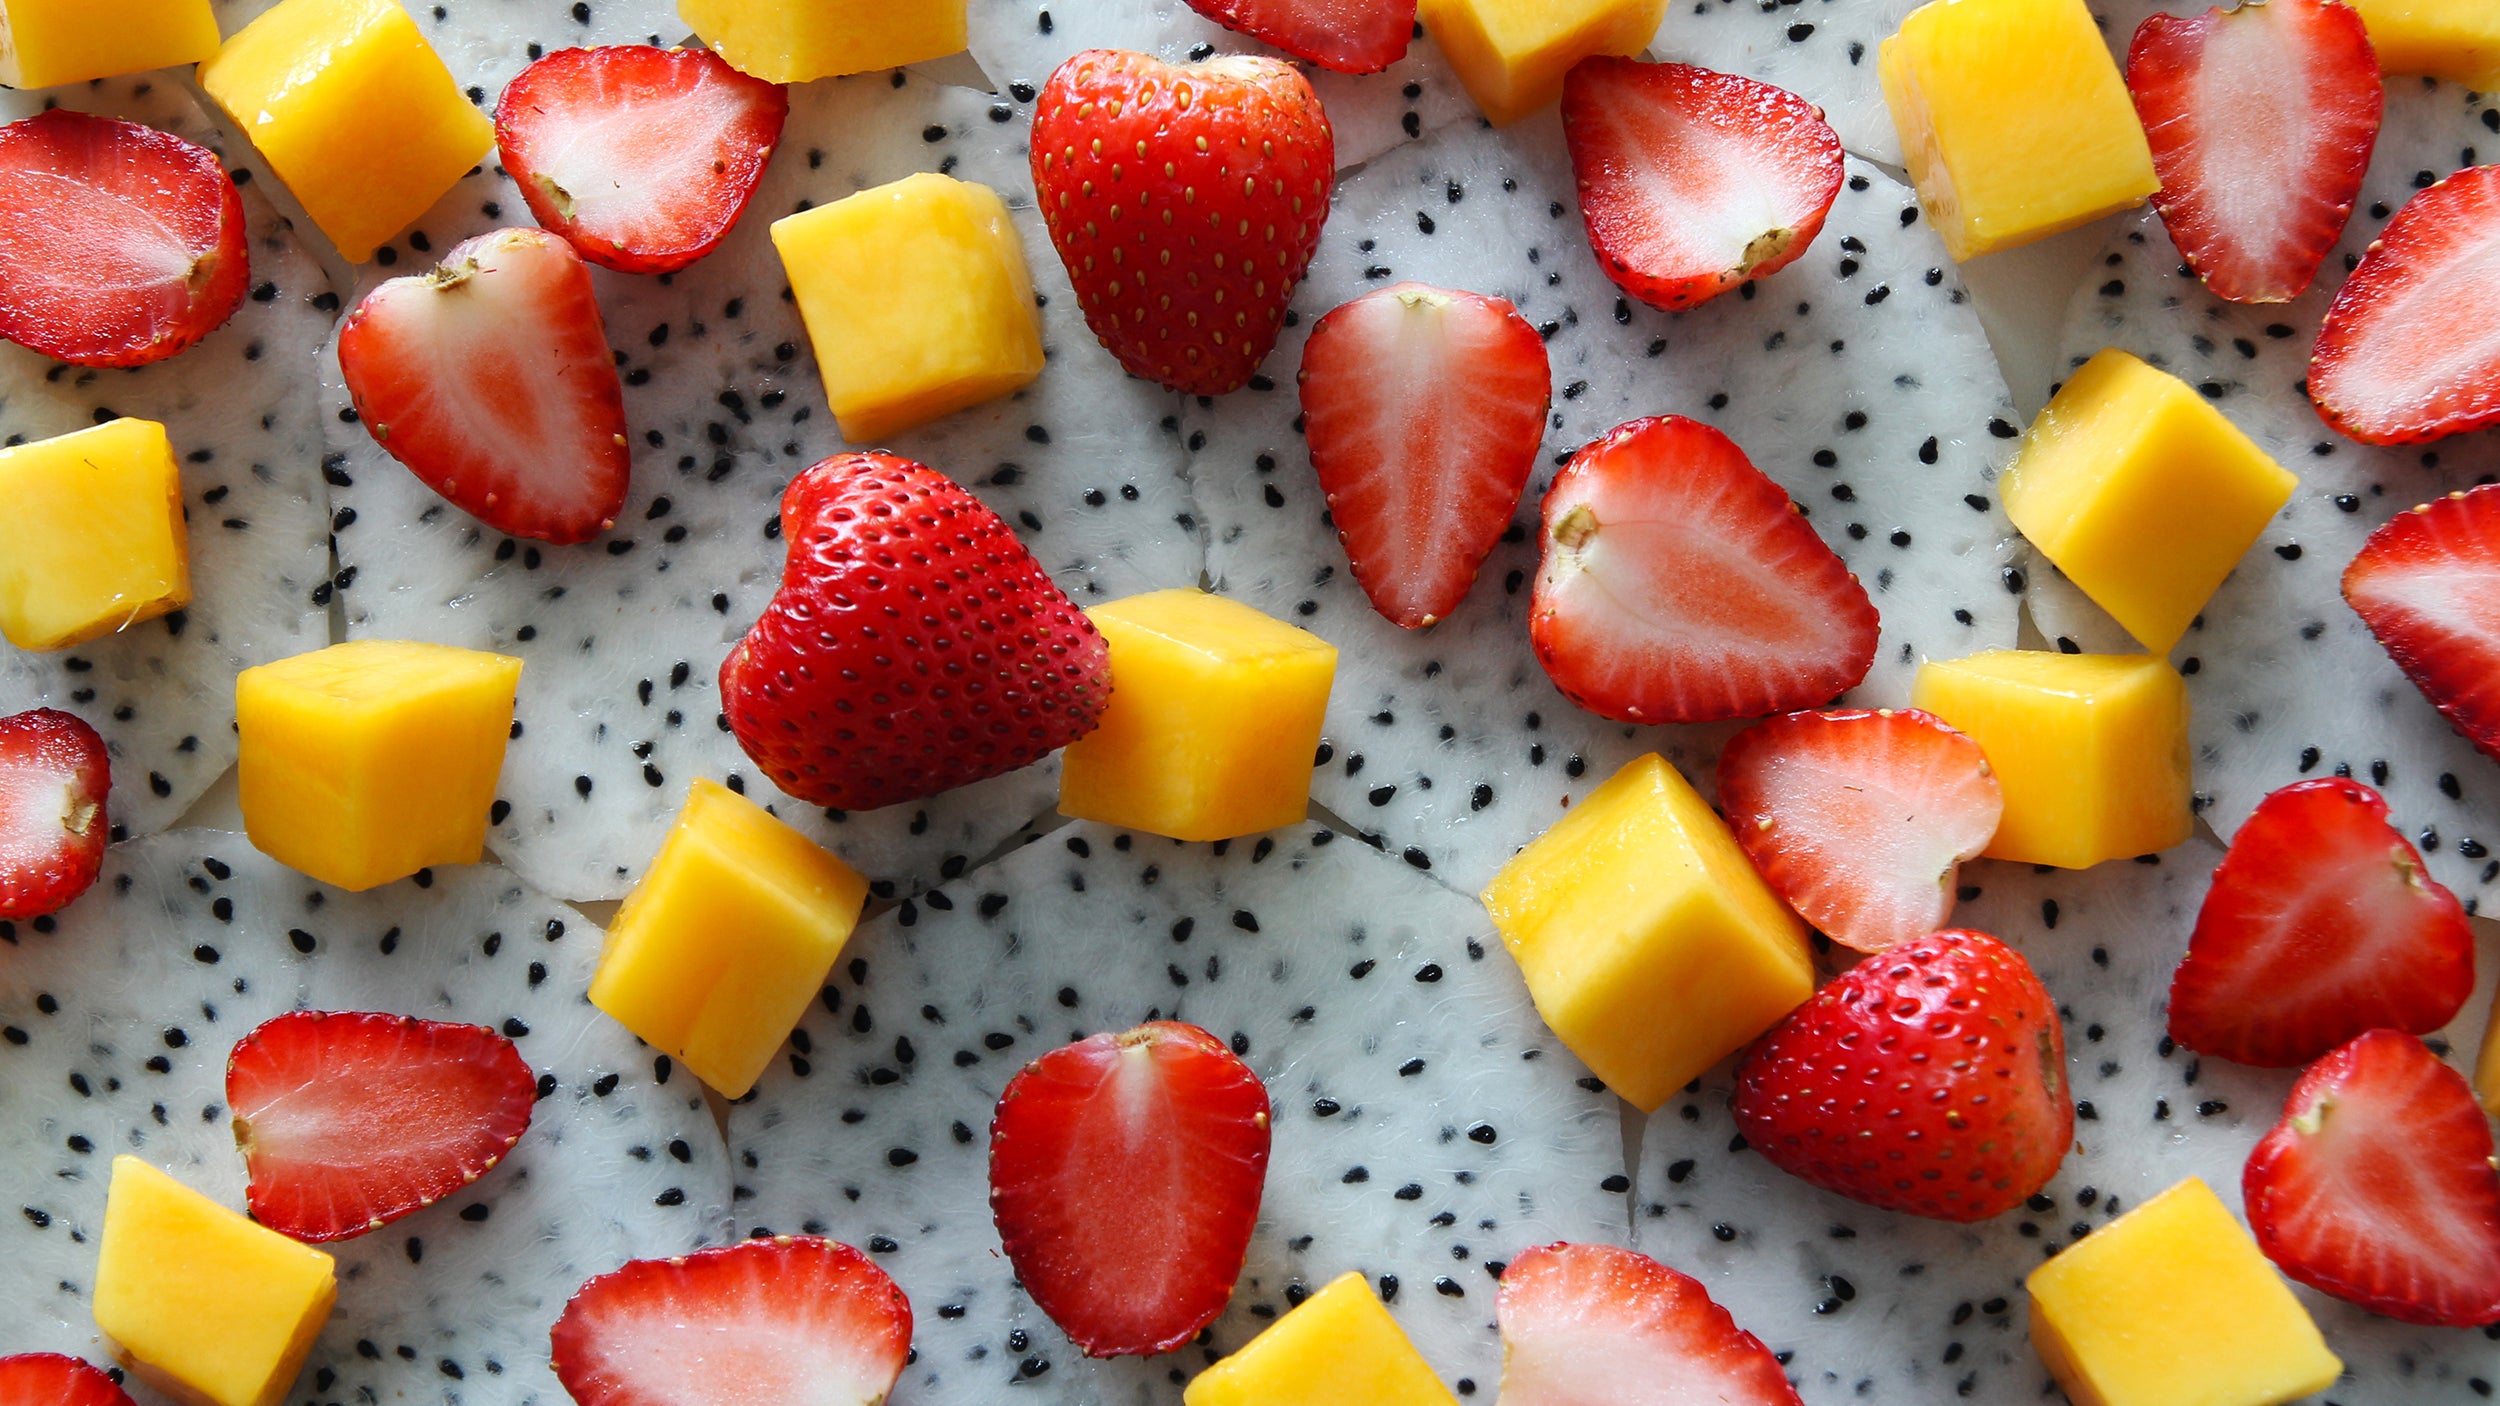 sliced and cubed strawberries and mango